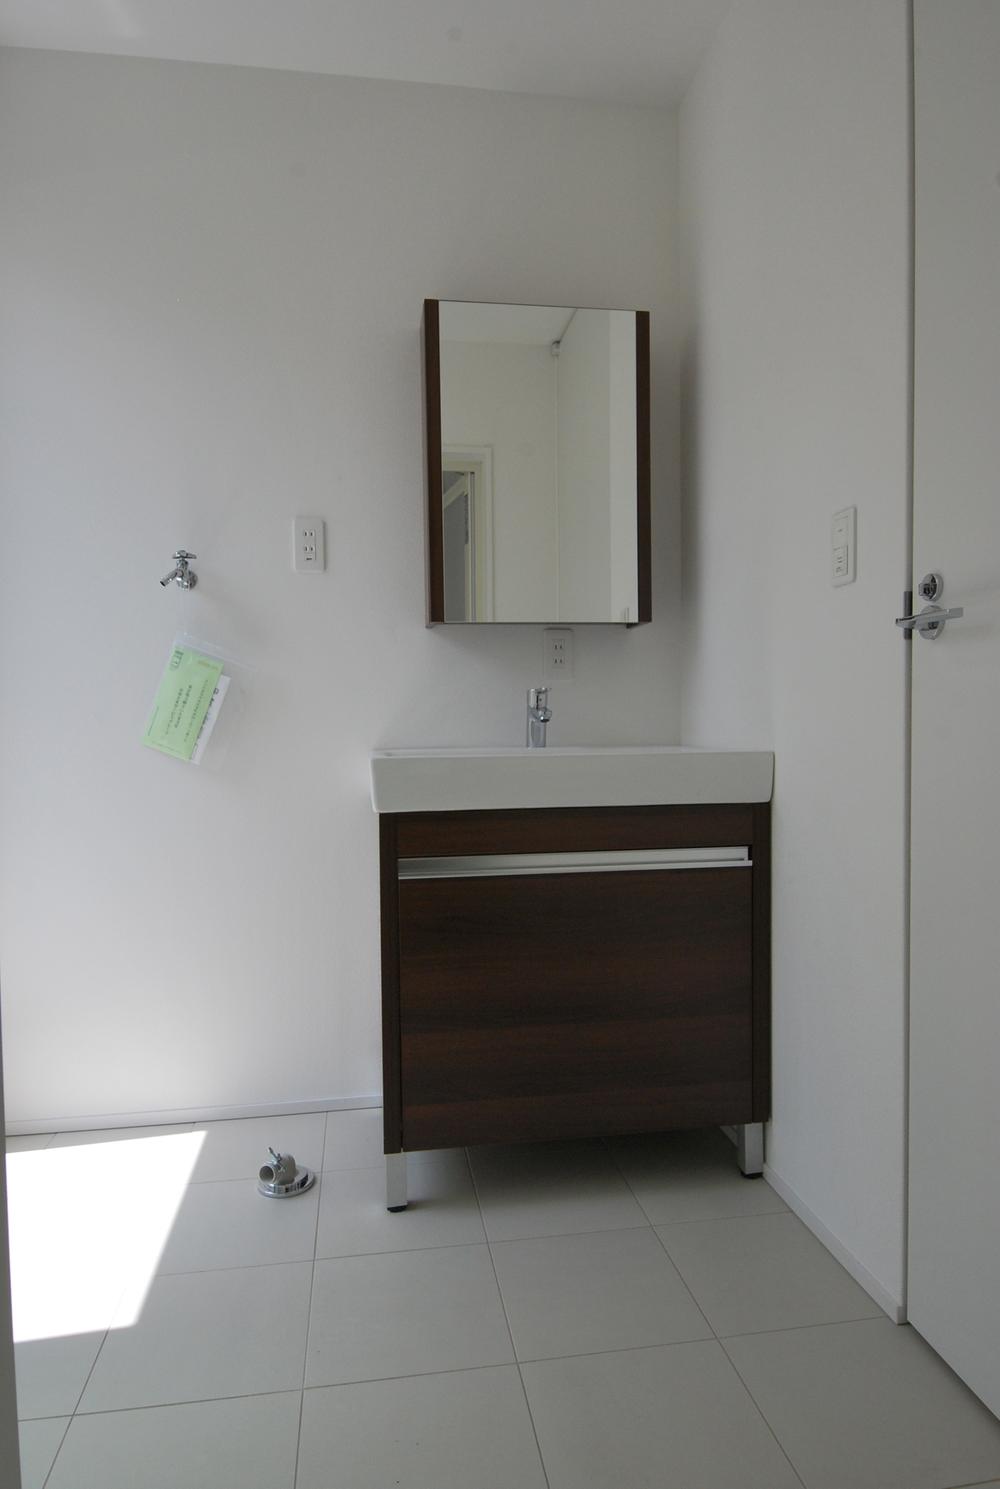 Wash basin, toilet. Bright wash undressing room incorporating light. Stylish wash basin is also one of the features. 